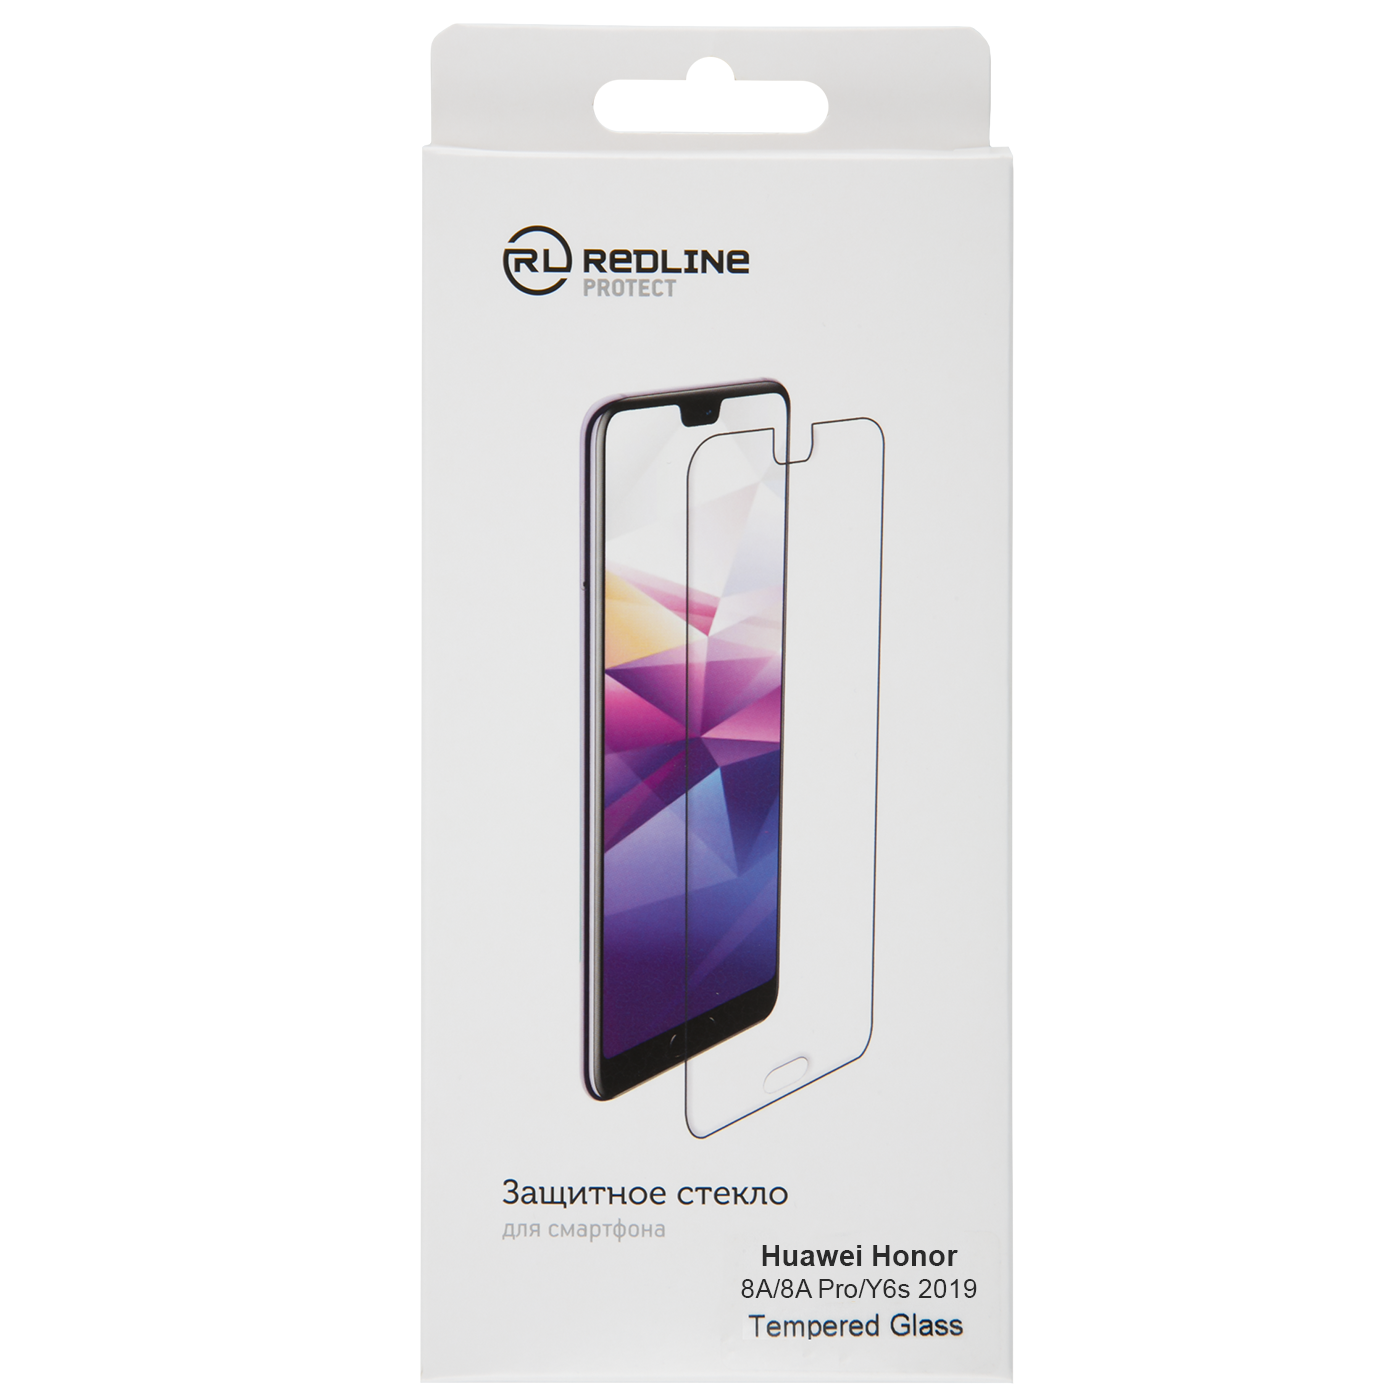 Защитный экран Huawei Honor 8A/8A Pro/Y6s 2019 tempered glass